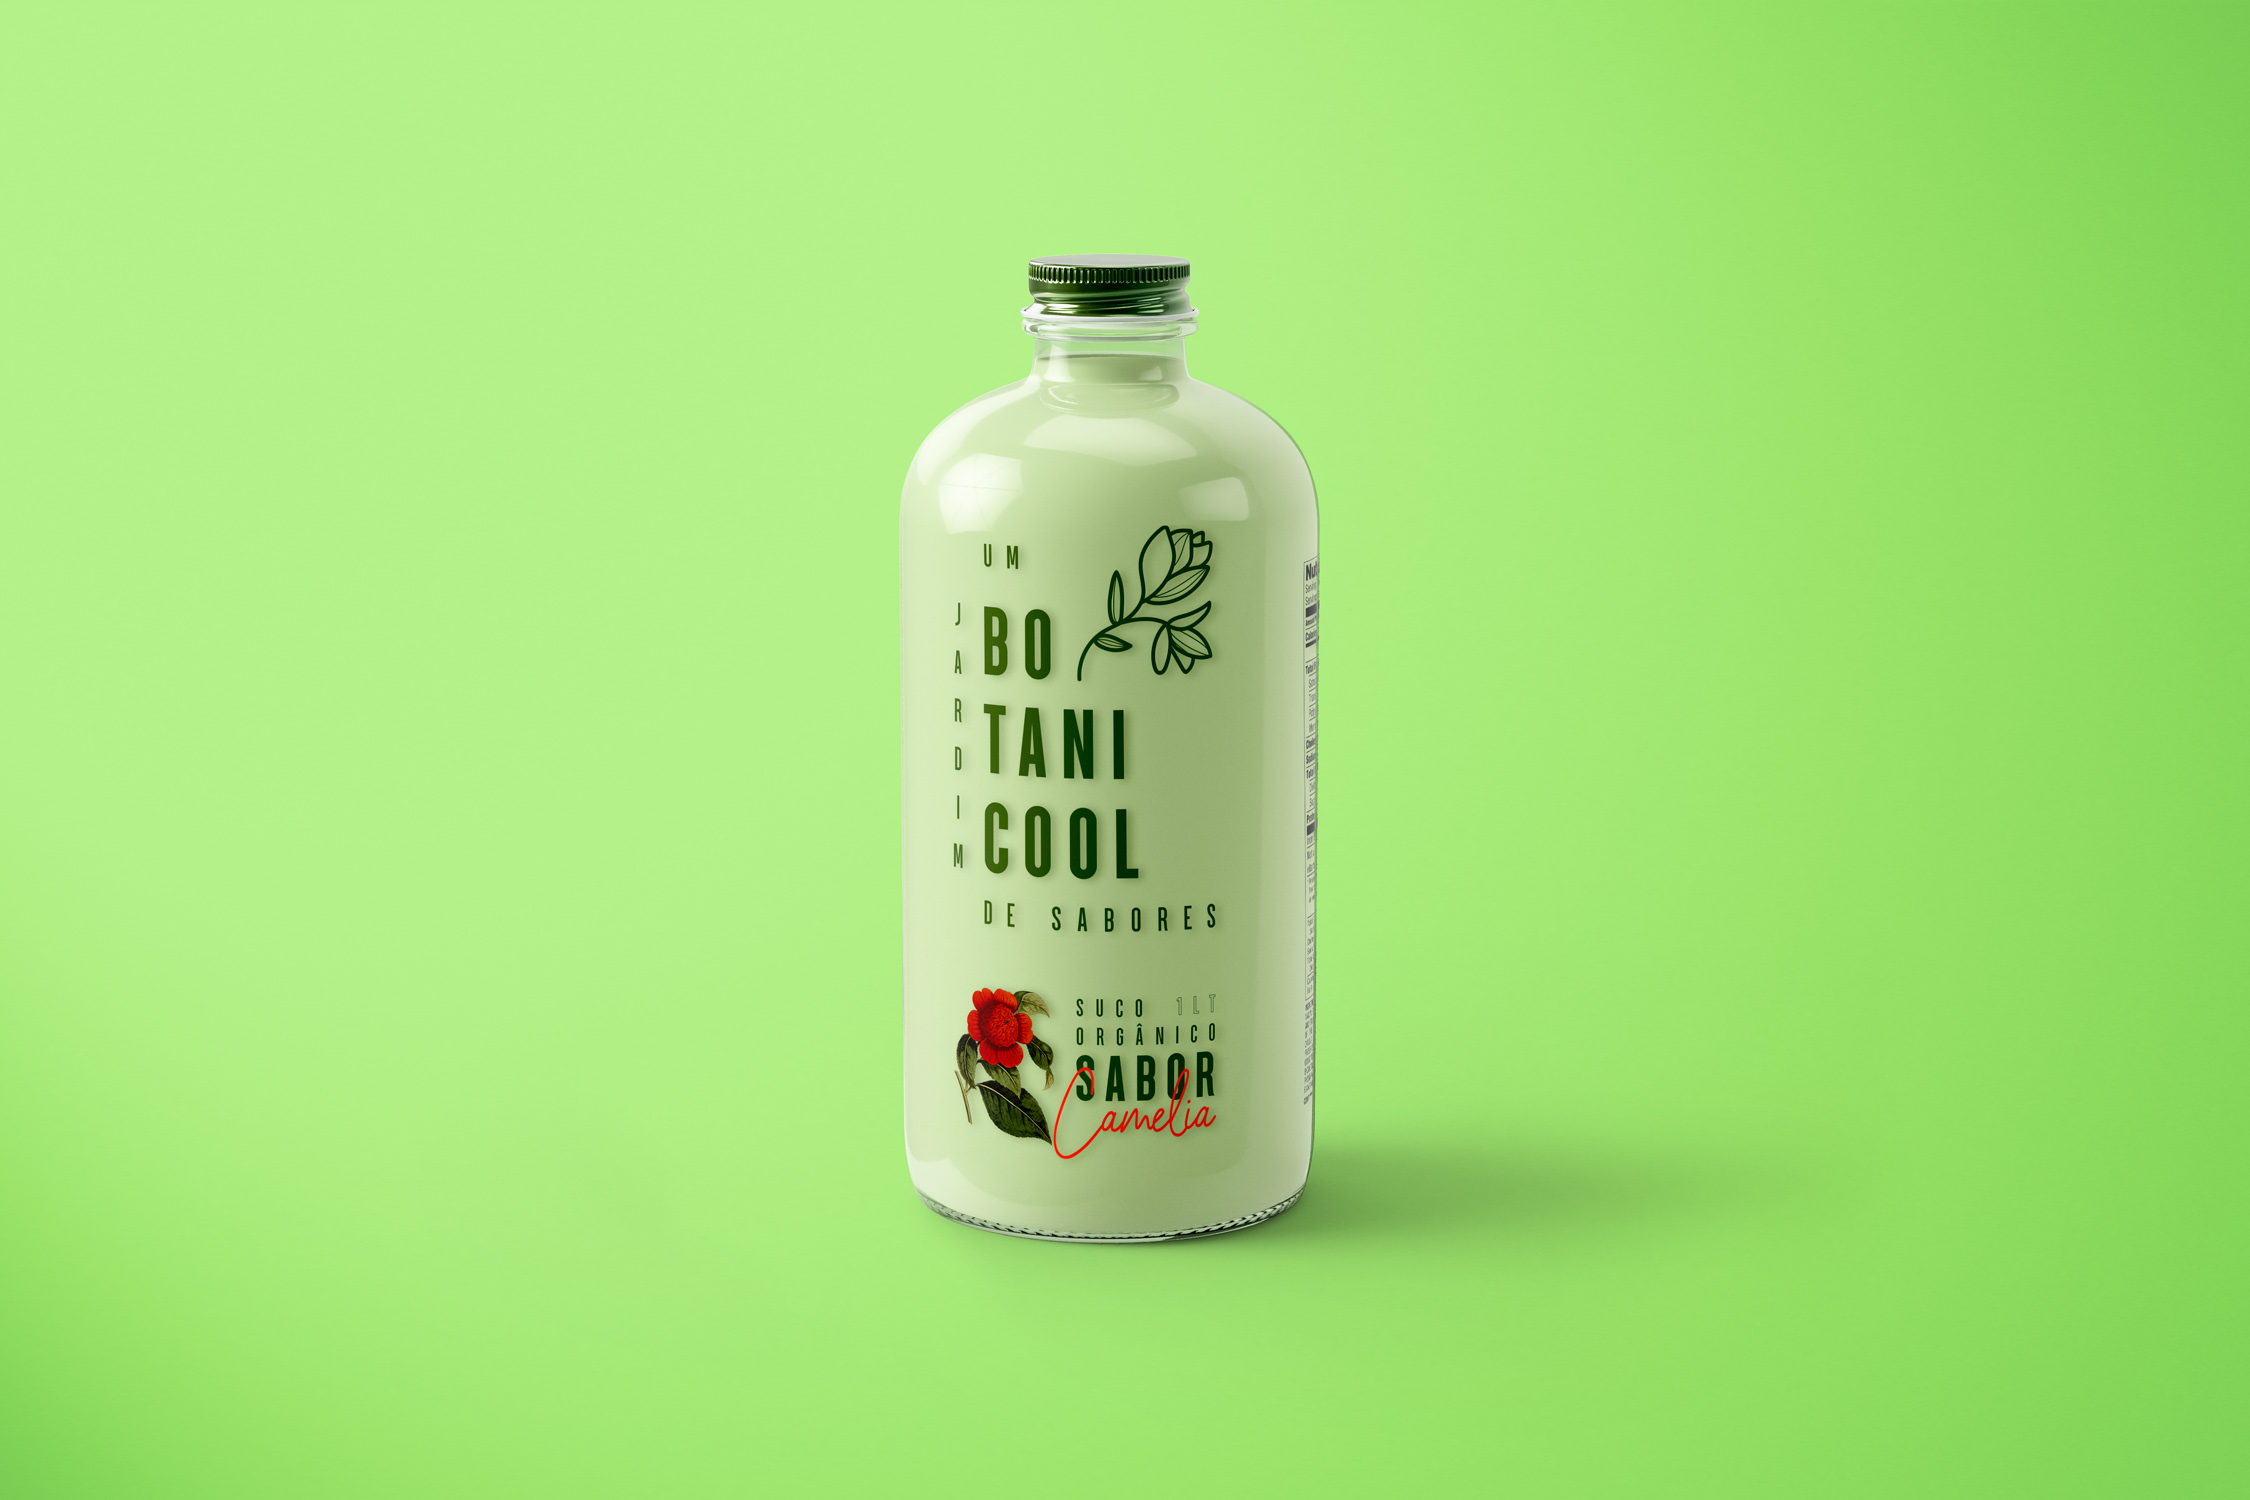 Development of Visual Identity and Packaging Design for Botanicool Organic Juices